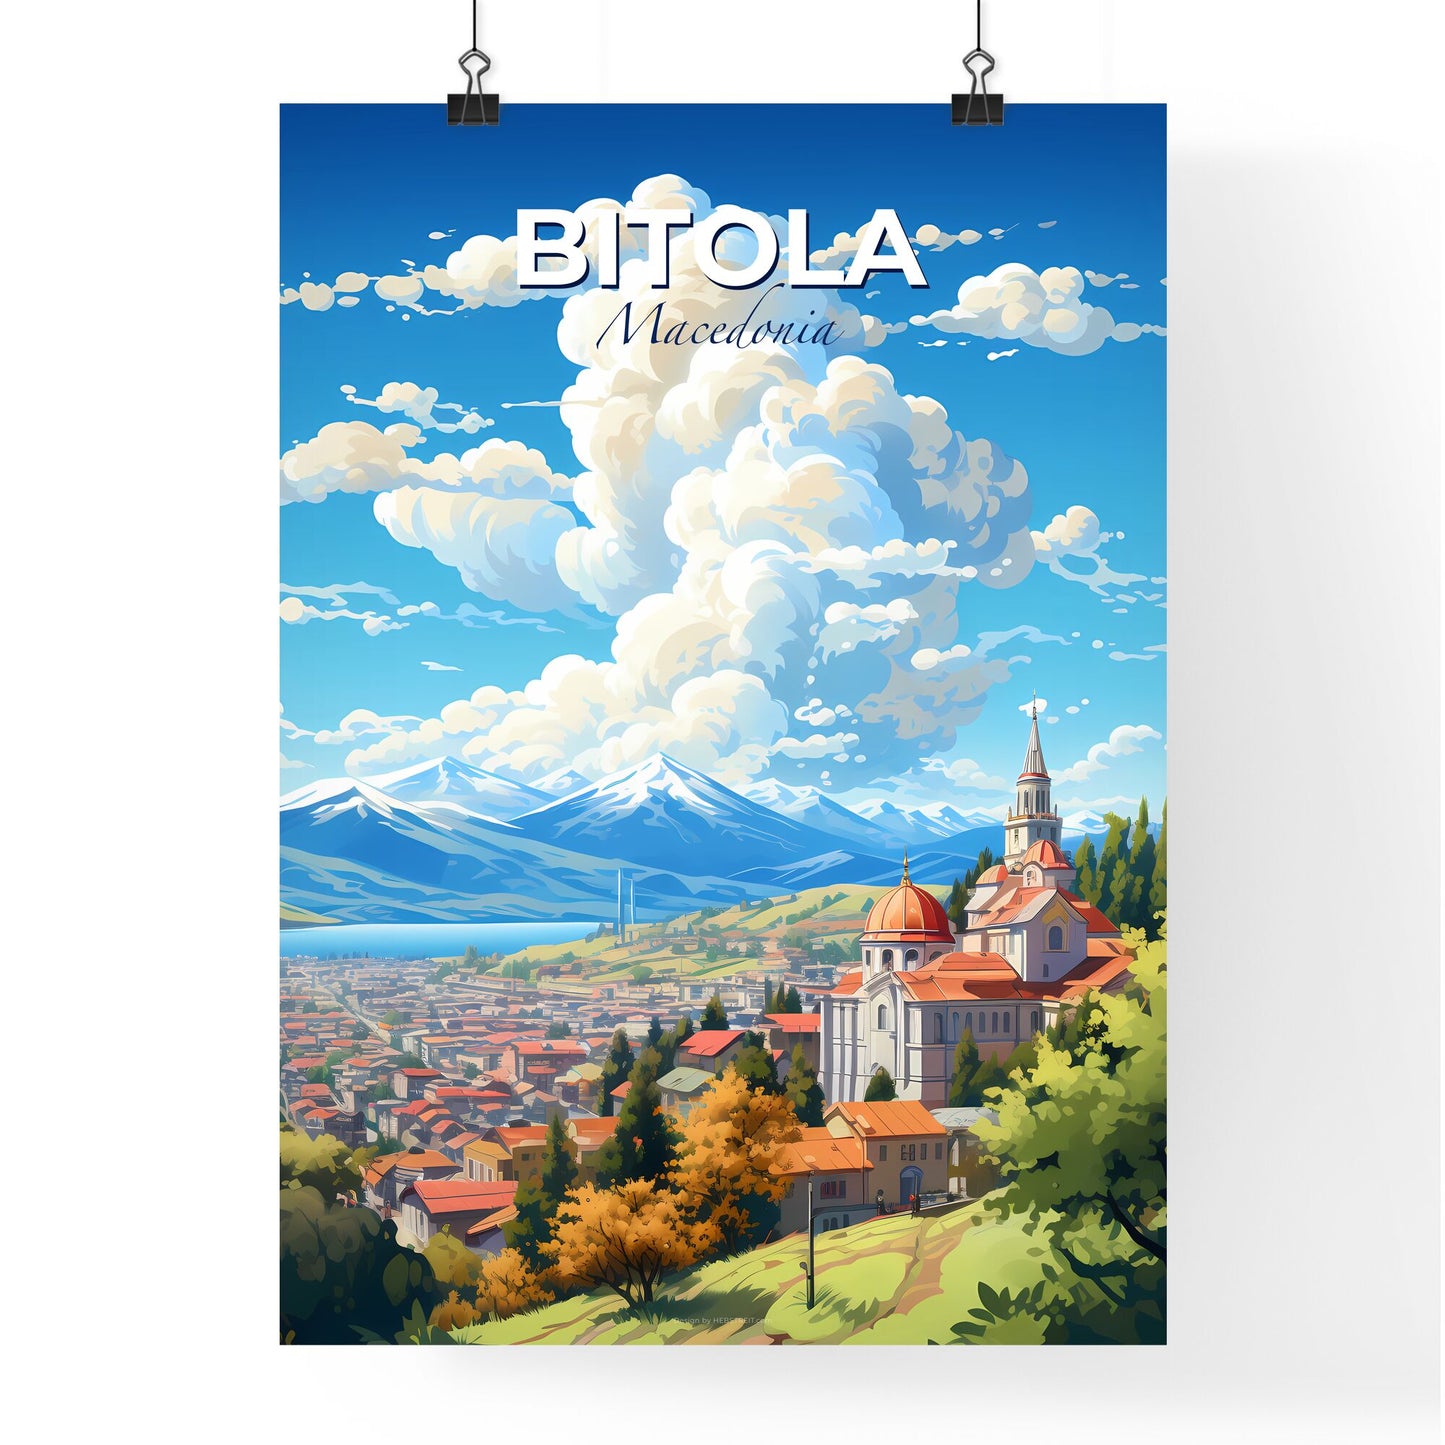 Bitola Macedonia Skyline - A City With A Church And Mountains In The Background - Customizable Travel Gift Default Title